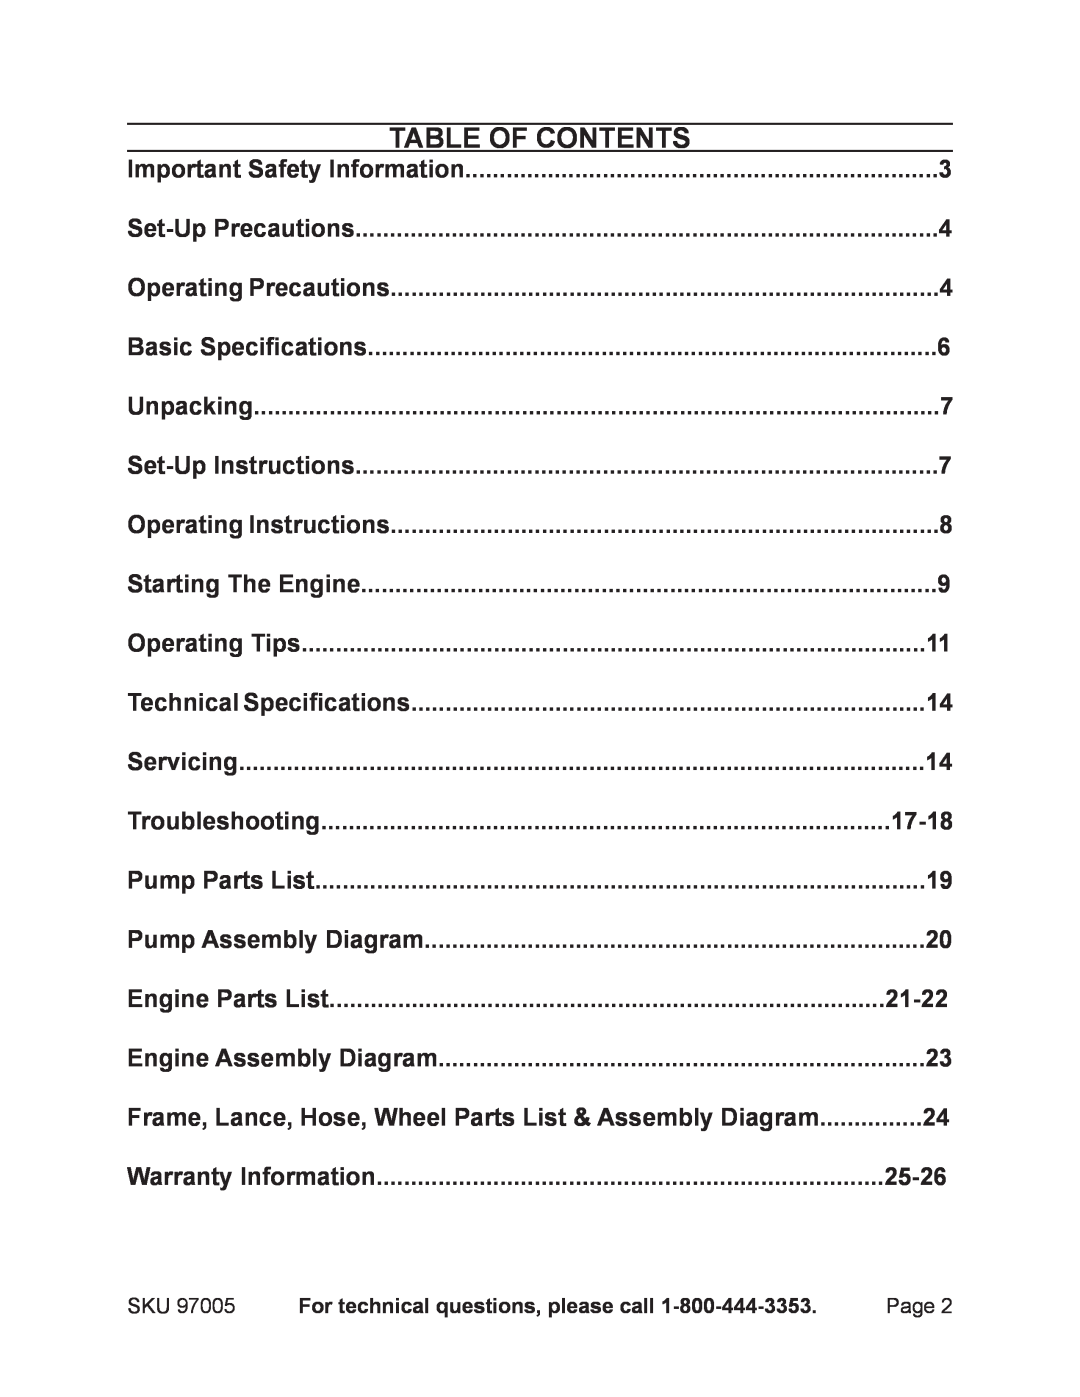 Harbor Freight Tools 97005 table of contents, Troubleshooting, 17-18, Engine Parts List, Warranty Information, Unpacking 